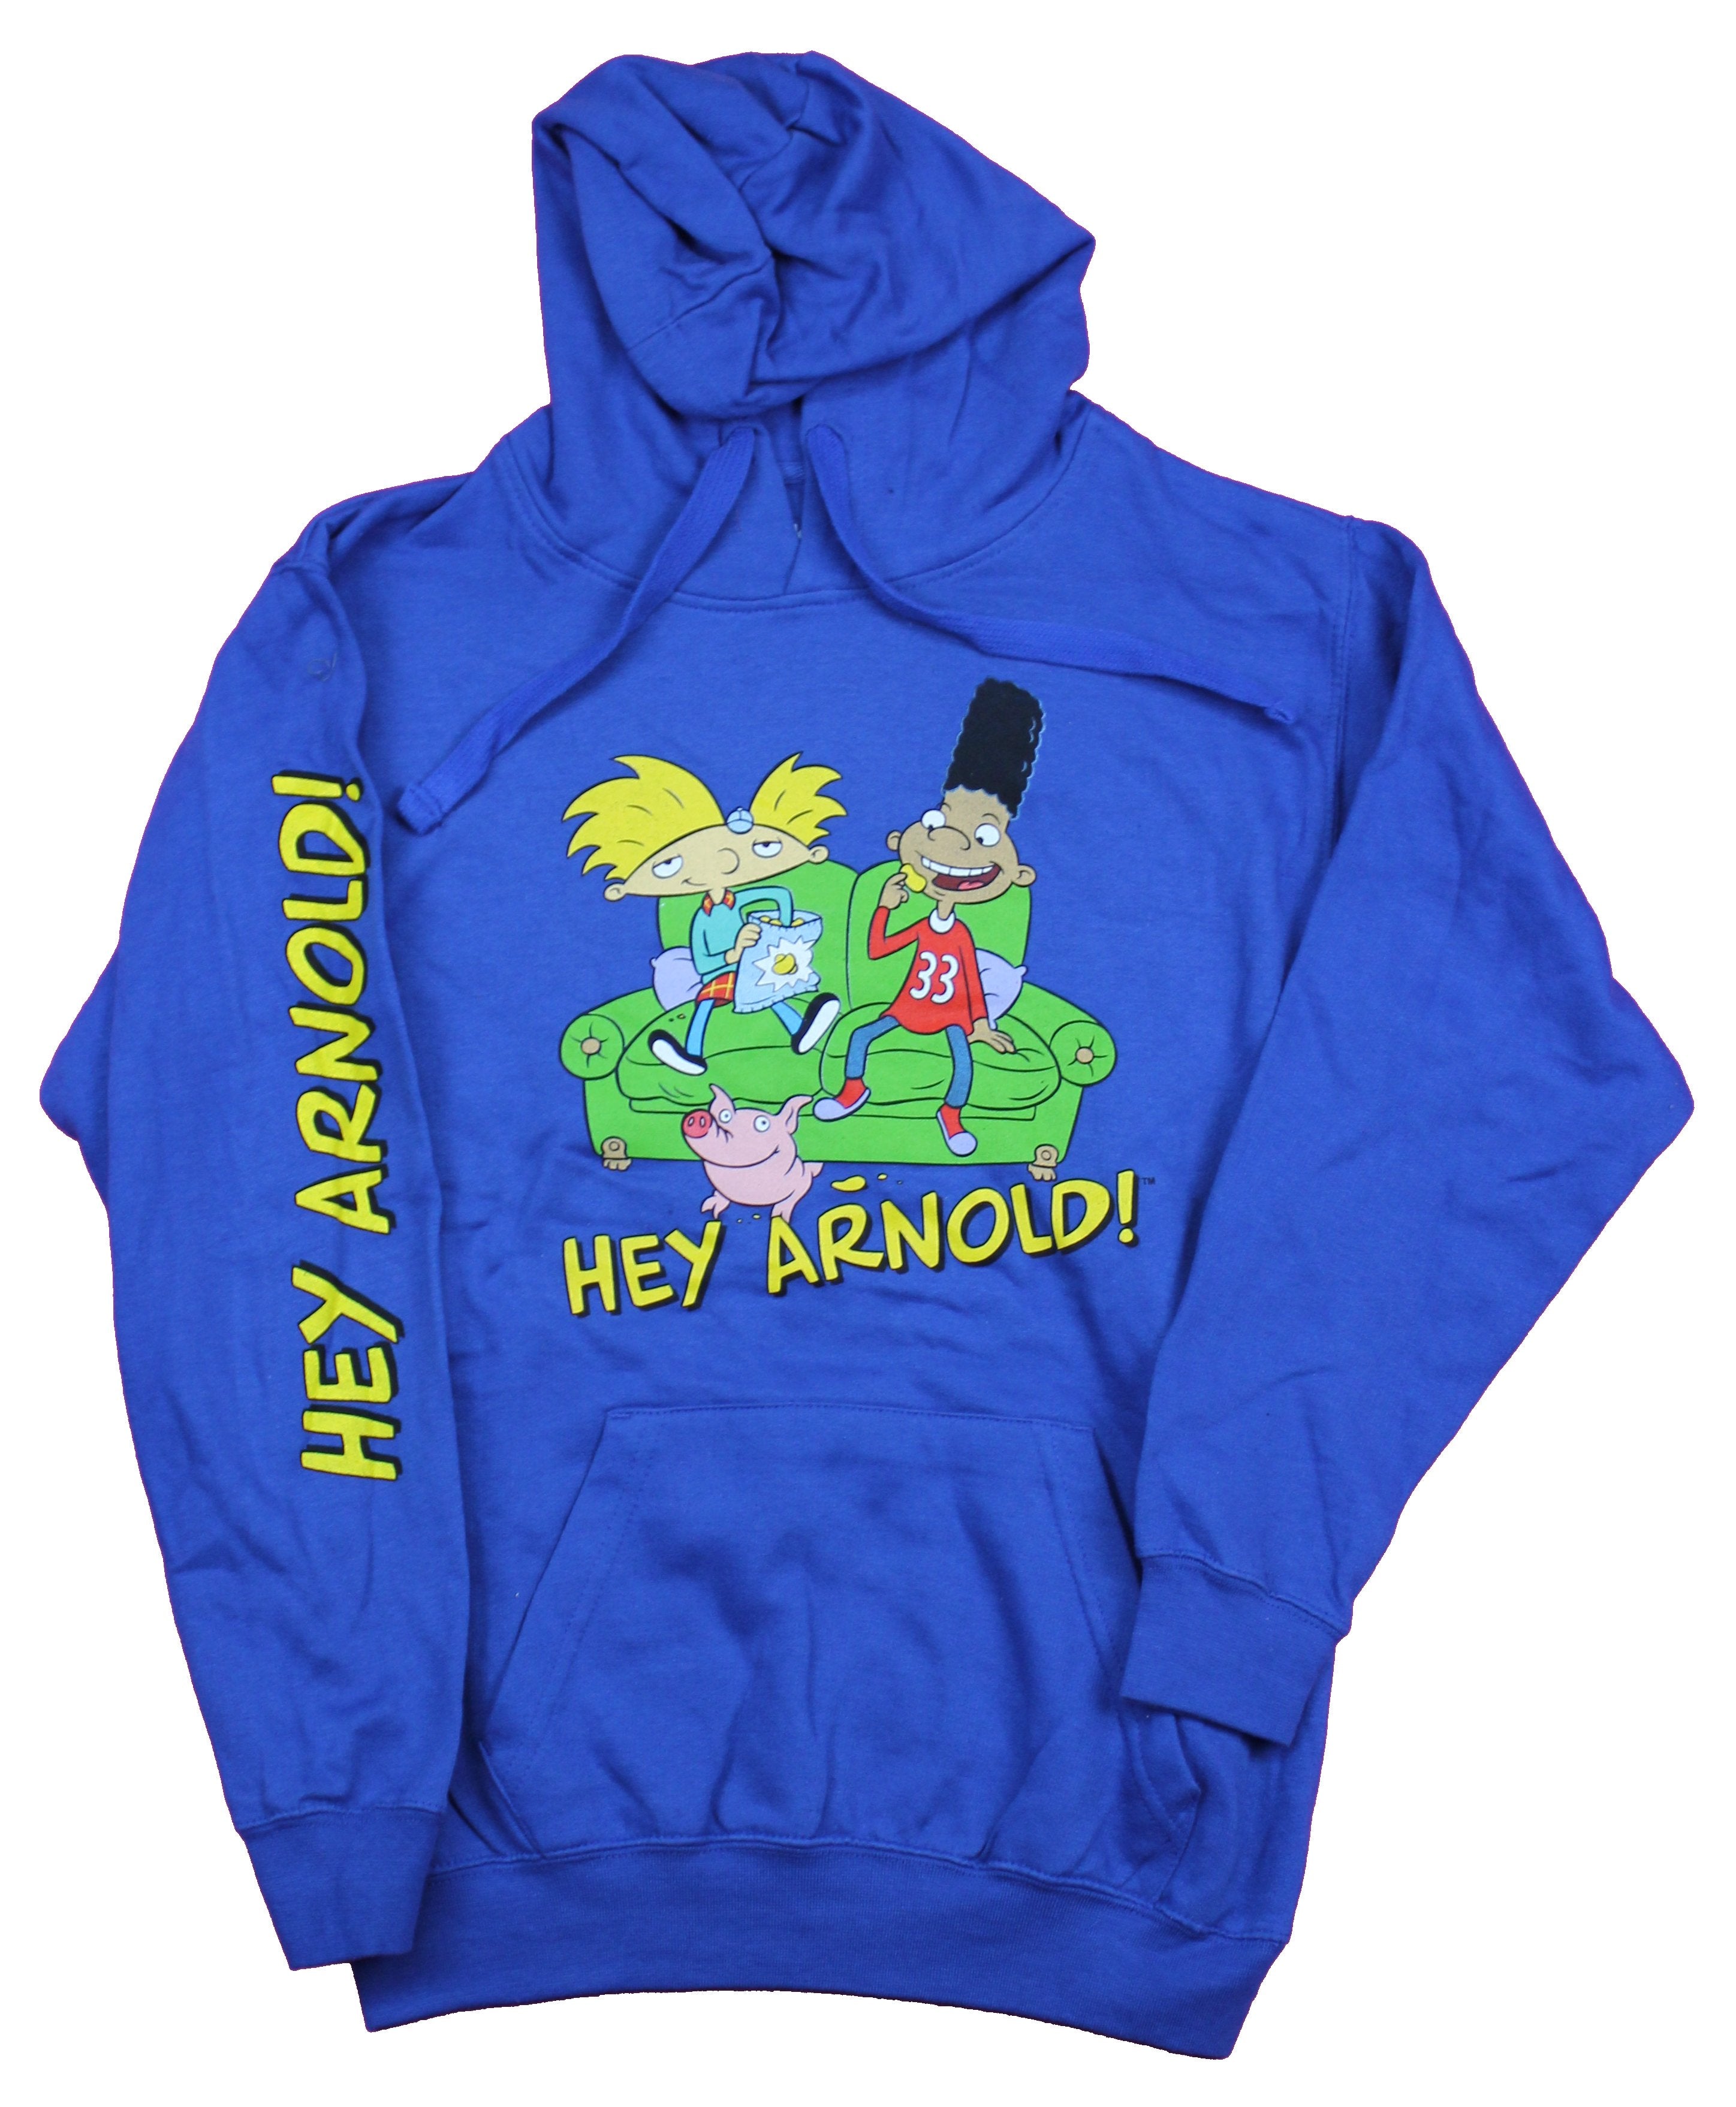 Hey Arnold Pullover Hoodie - Arnold & Gerald Couch Hang Image